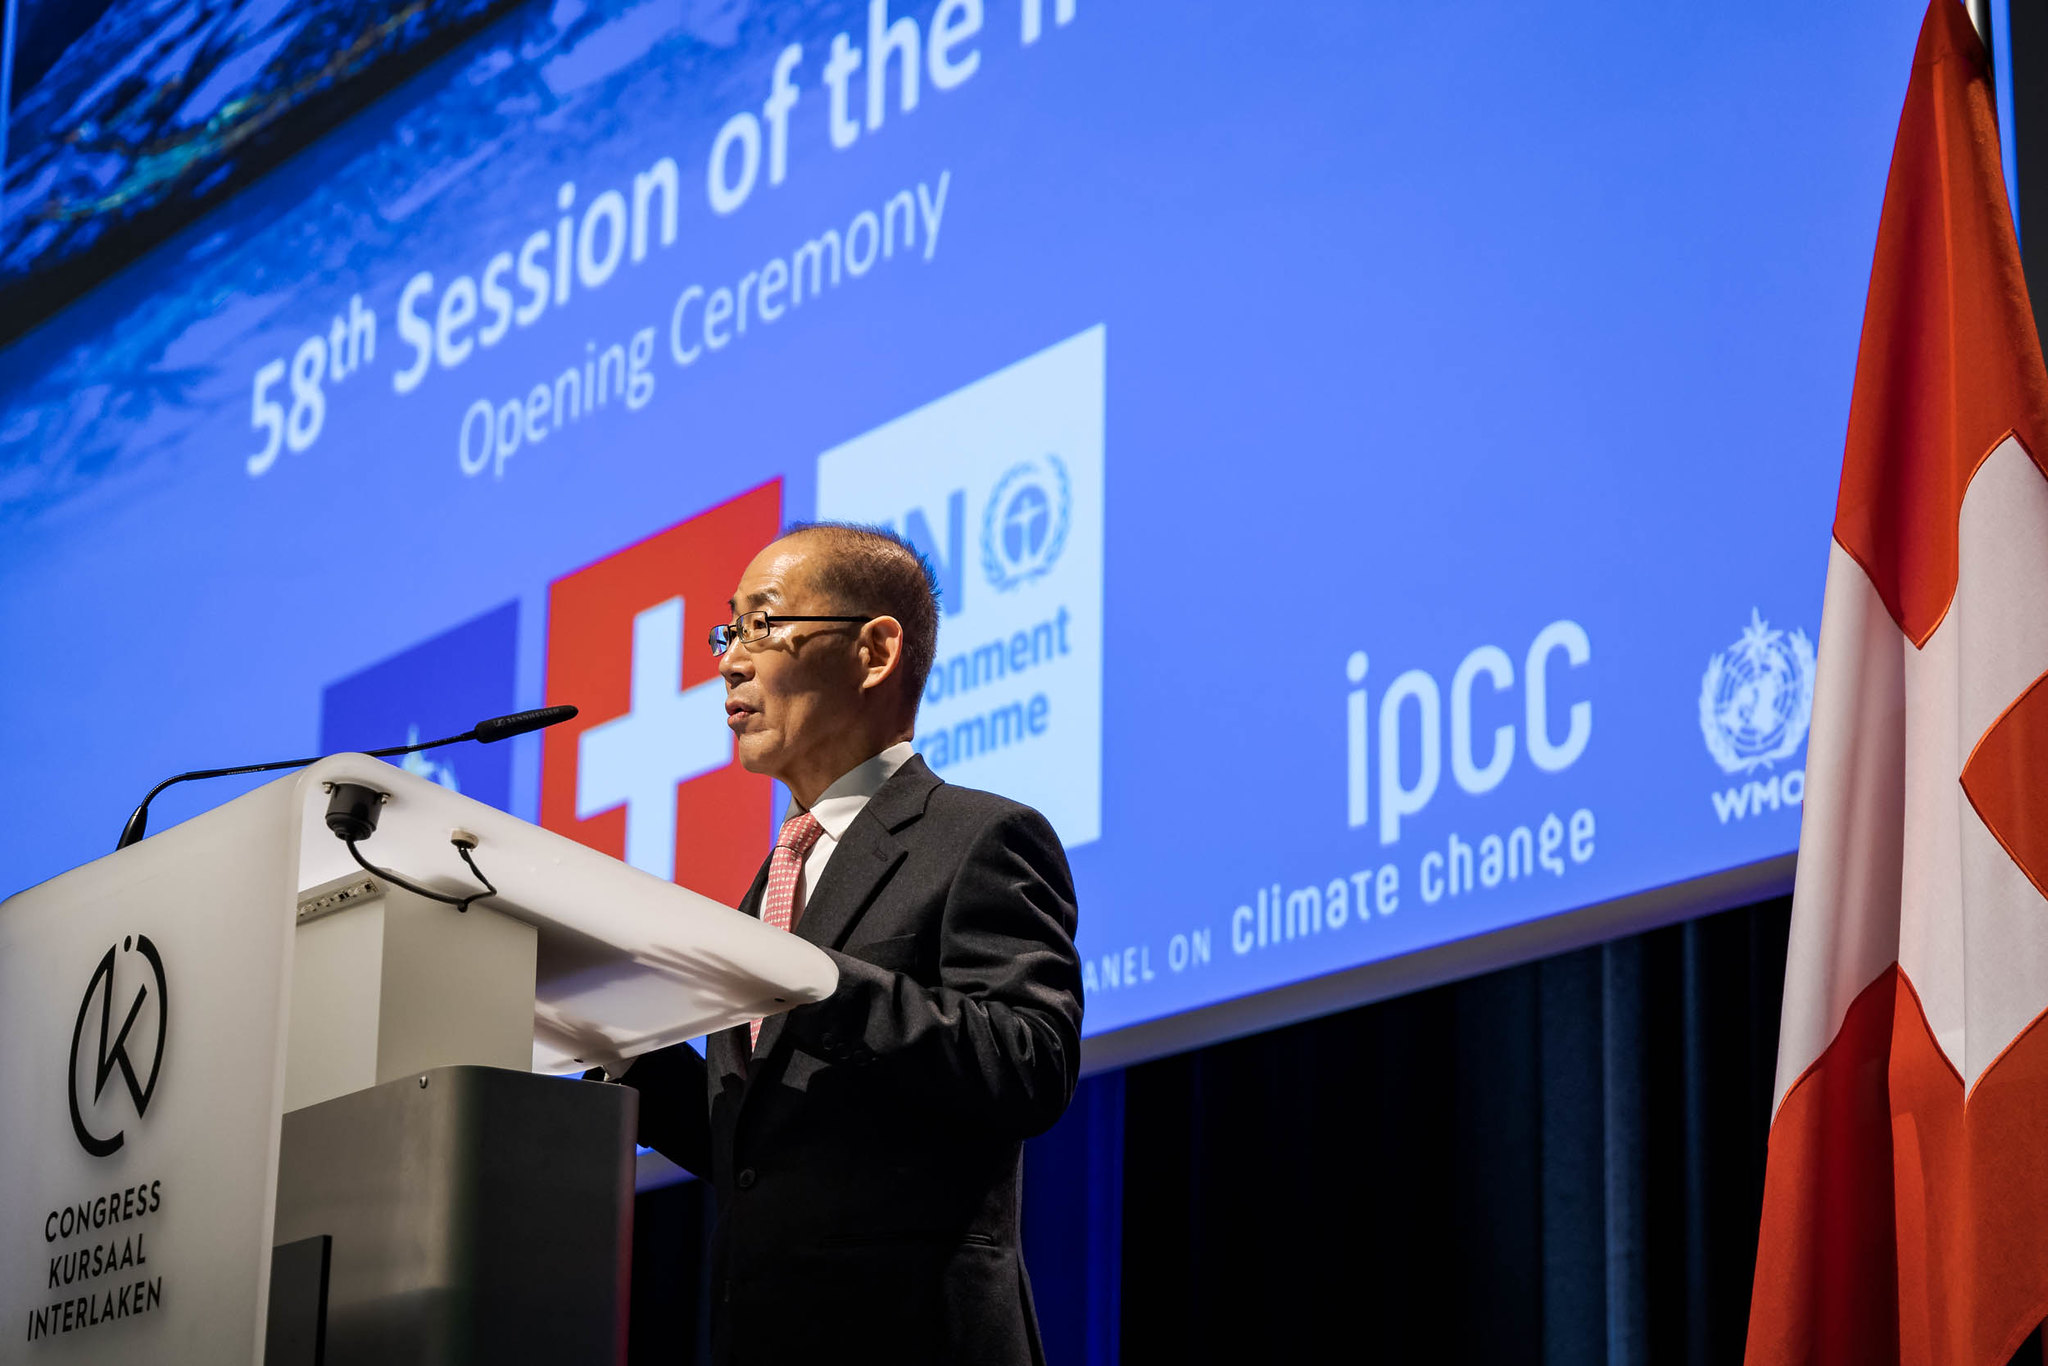 IPCC Chair Hoesung Lee at the press conference.